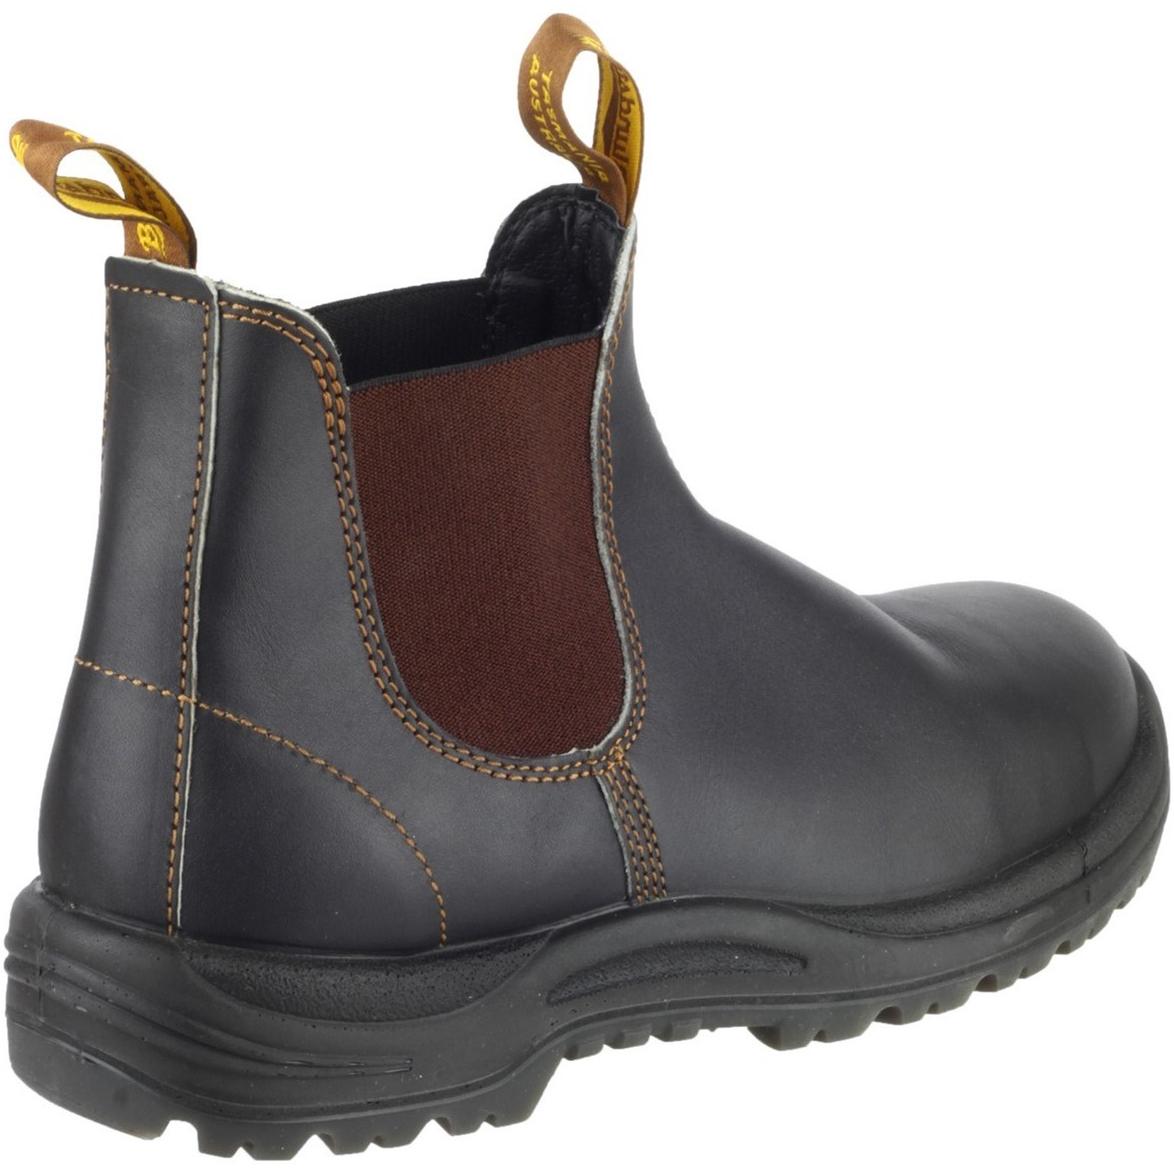 Blundstone 192 Industrial Safety Boot